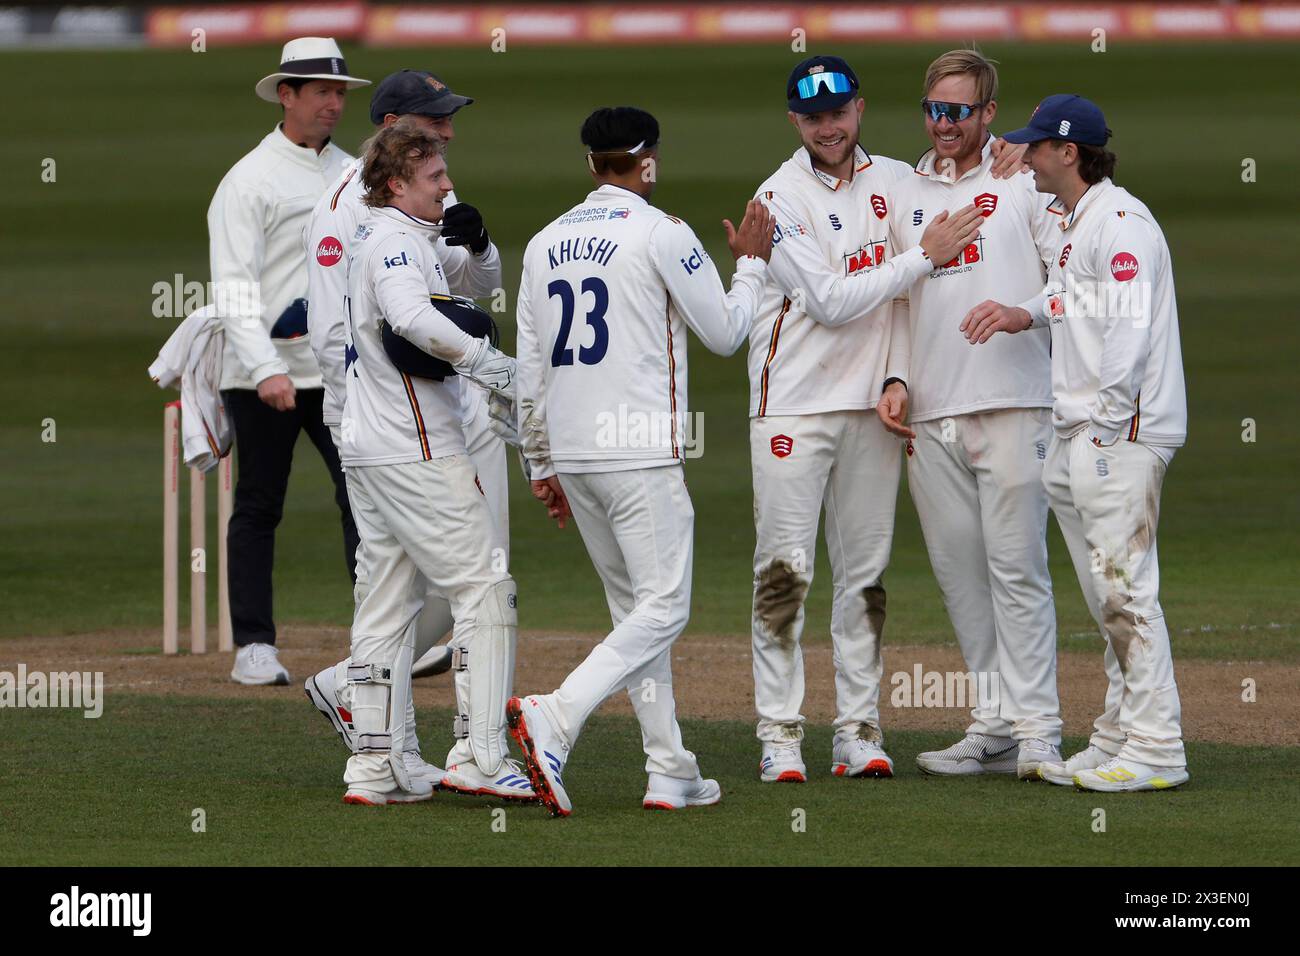 Essex Simon Hamer celebrates with his team mates after bowling Durham's Graham Clark during the LV= County Championship match between Durham County Cricket Club and Essex at the Seat Unique Riverside, Chester le Street on Friday 26th April 2024. (Photo: Mark Fletcher | MI News) Credit: MI News & Sport /Alamy Live News Stock Photo